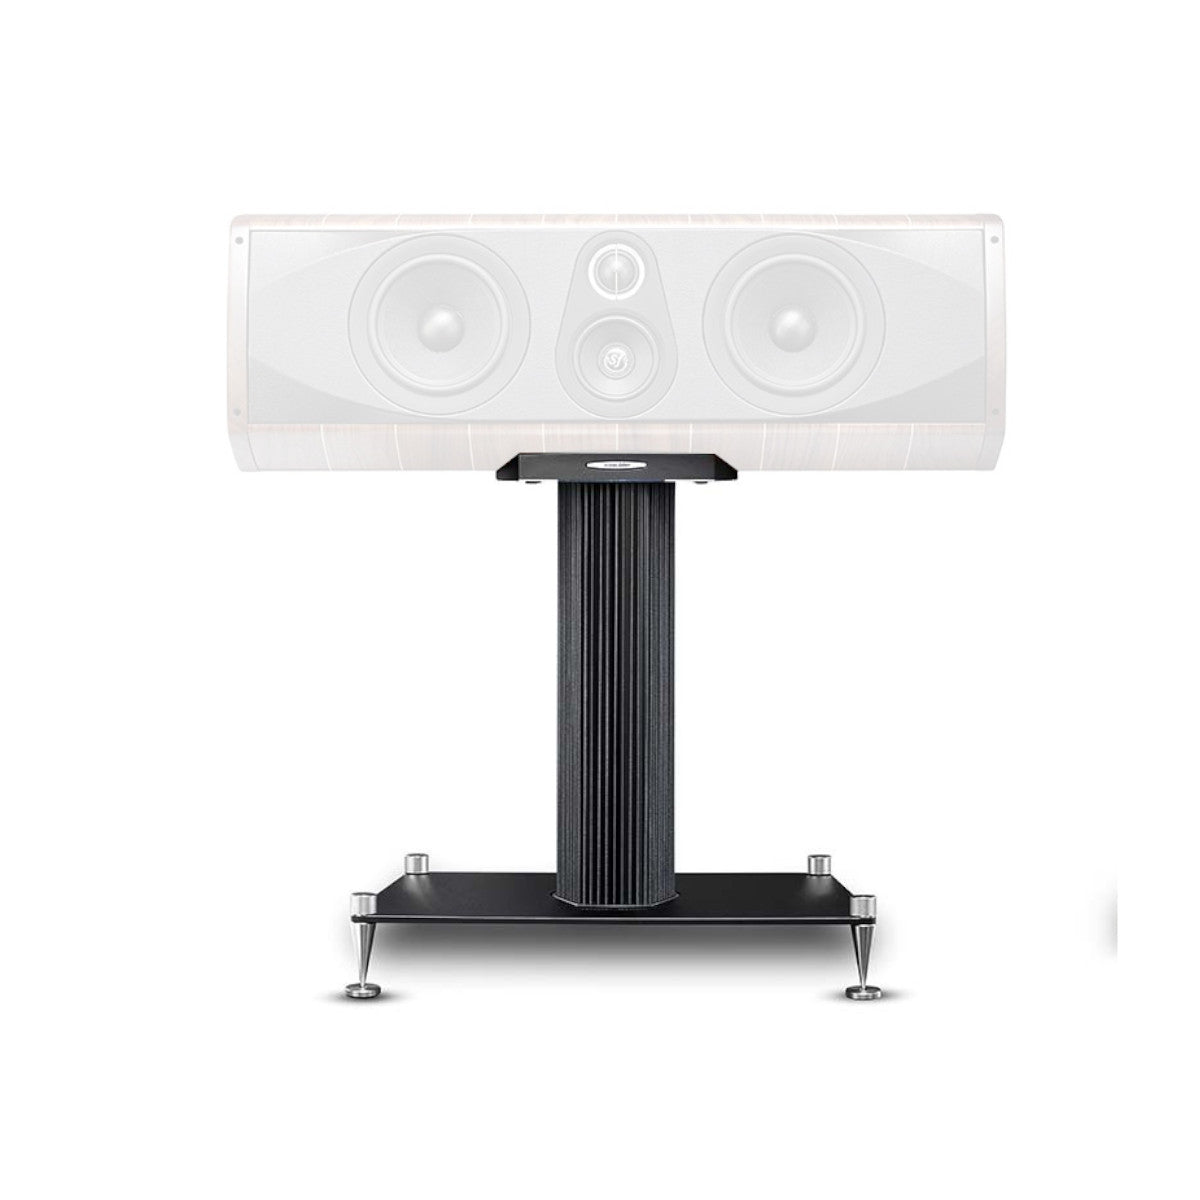 Sonus faber Olympica Center Channel Speaker Stand (Each) - Ooberpad India